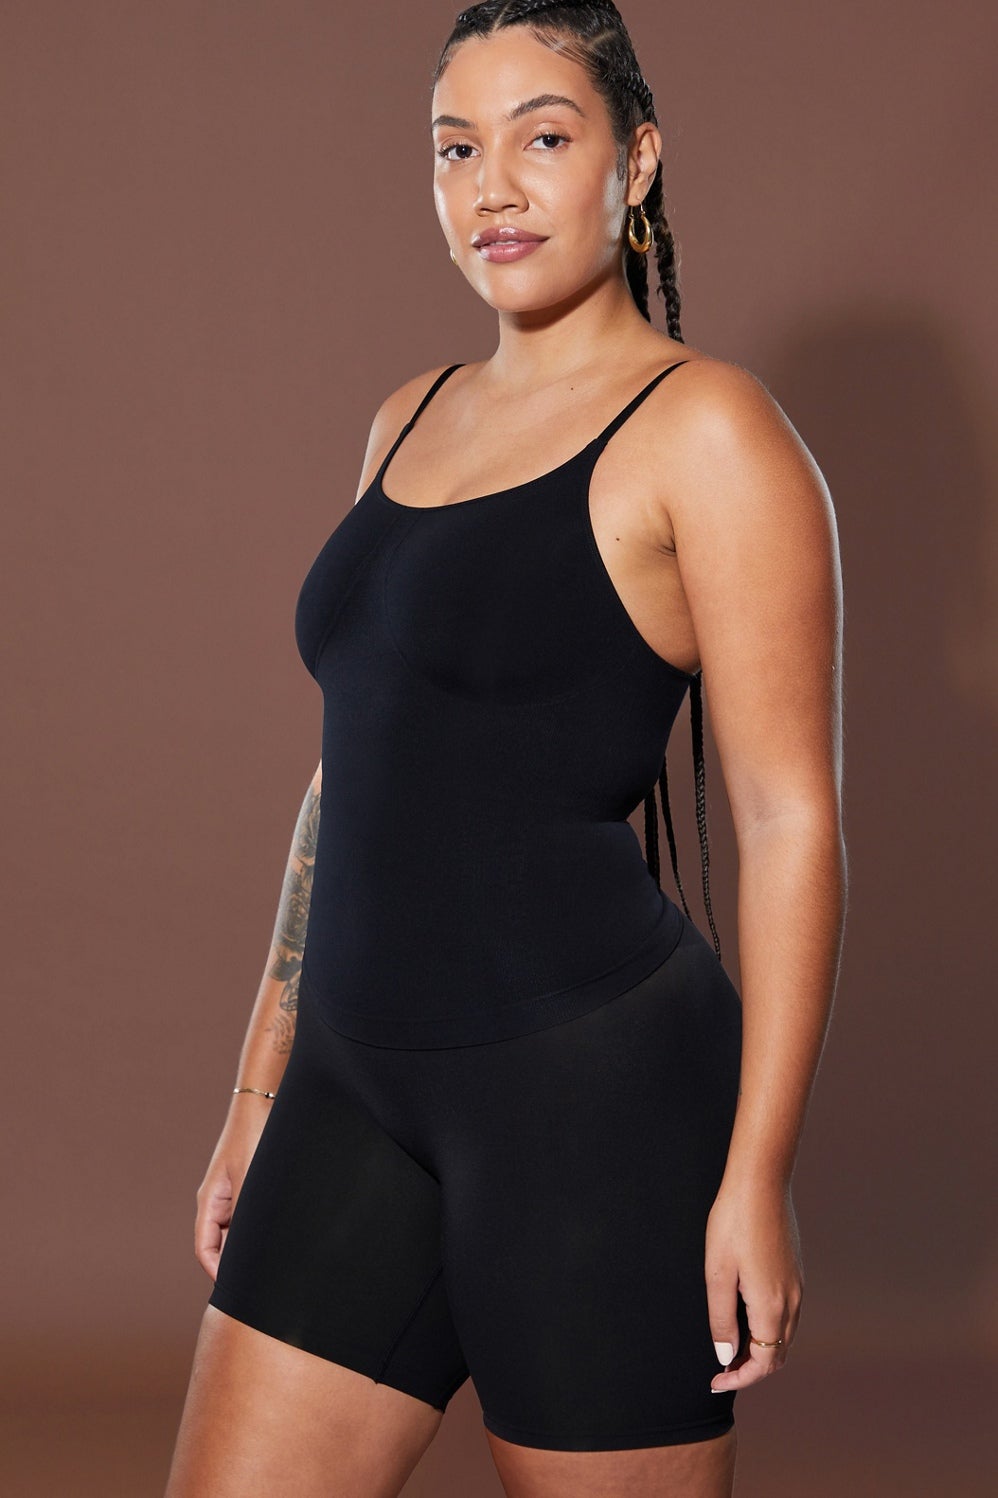 Trying Lizzo's New Shapewear Line Yitty! XL/XXL (Honest review